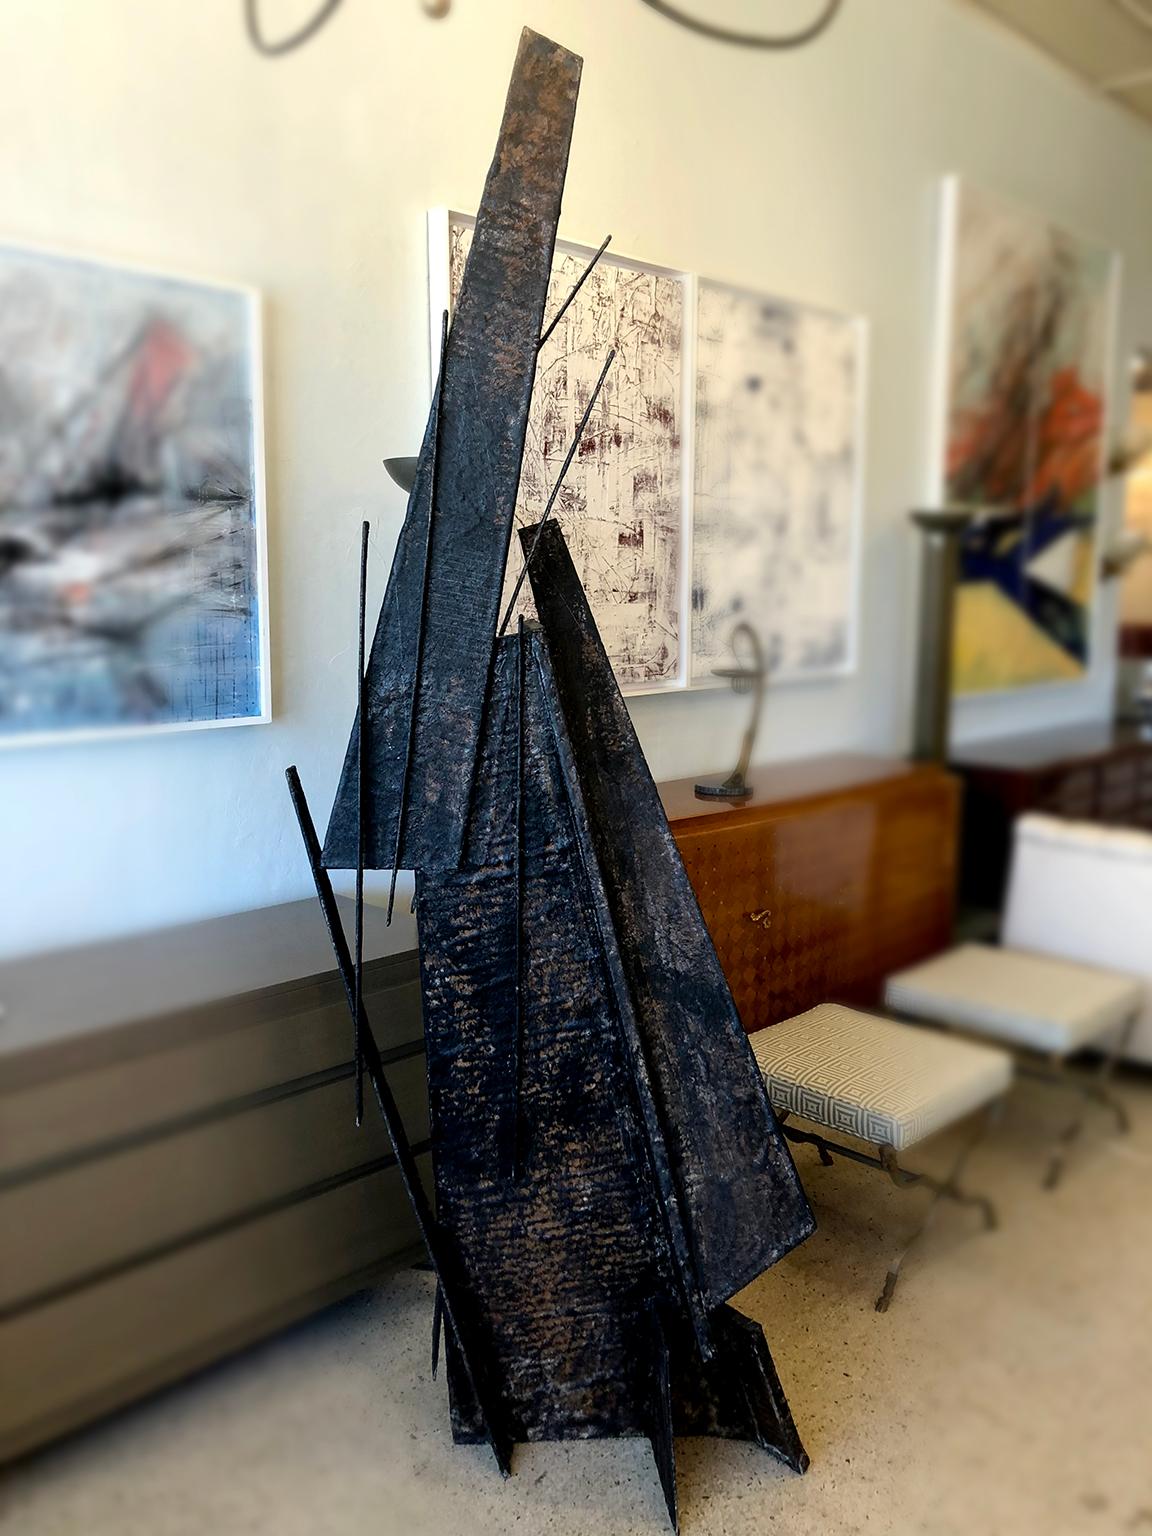 An imposing sculpture made of Fiberglass and painted to resemble patinated bronze. The piece takes on a different shape from all sides. Constructed in fiberglass, it is lightweight, so the piece can be turned to view it from many different